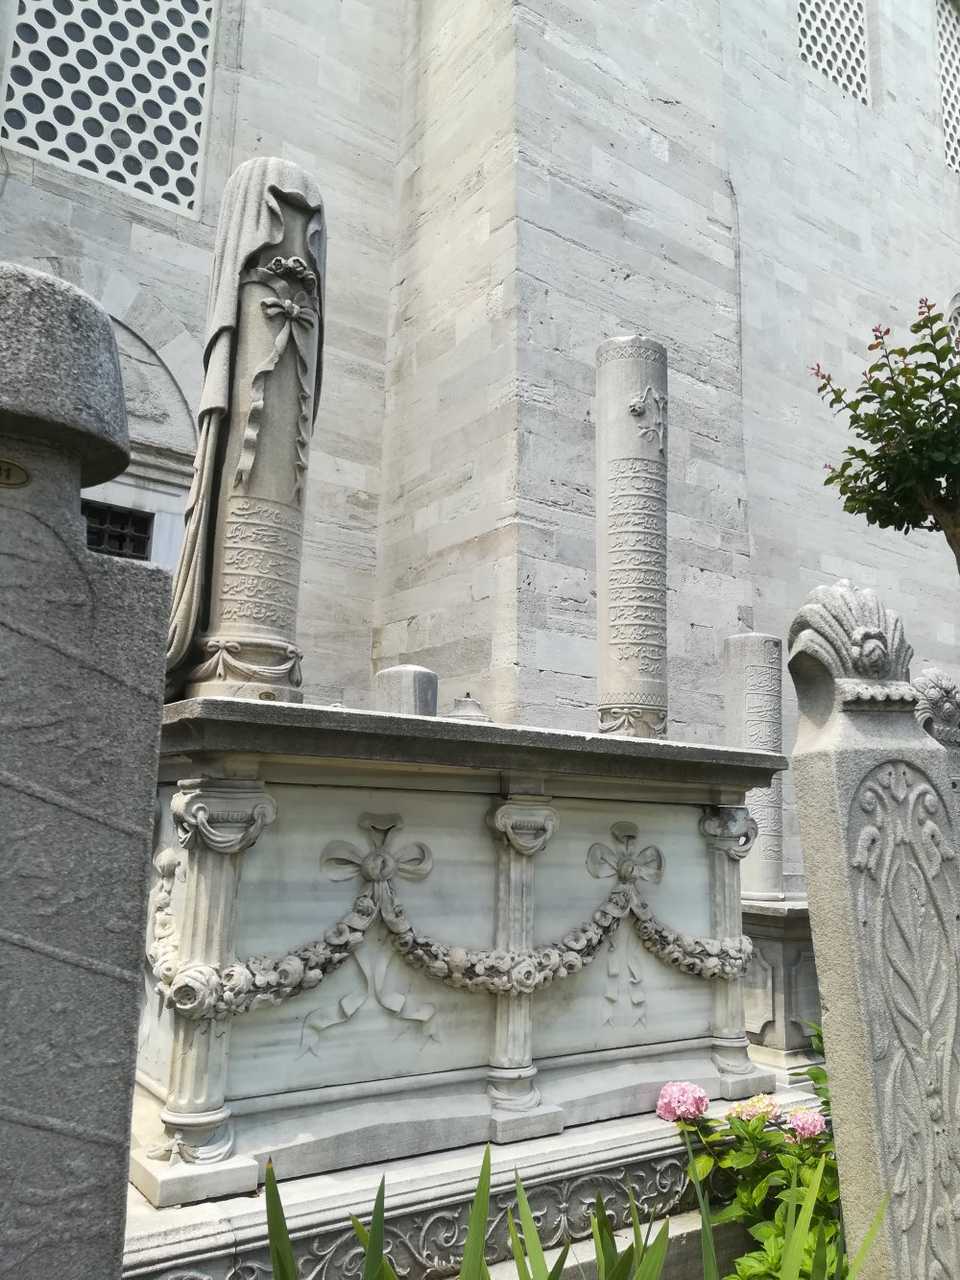 This tomb belongs to a young women Fatma Müşerref Hanım, passed away in 1910 and originally from Thessaloniki. She was engaged and passed away before she married, wherefore on the left tombestone, there is a bridal dress.